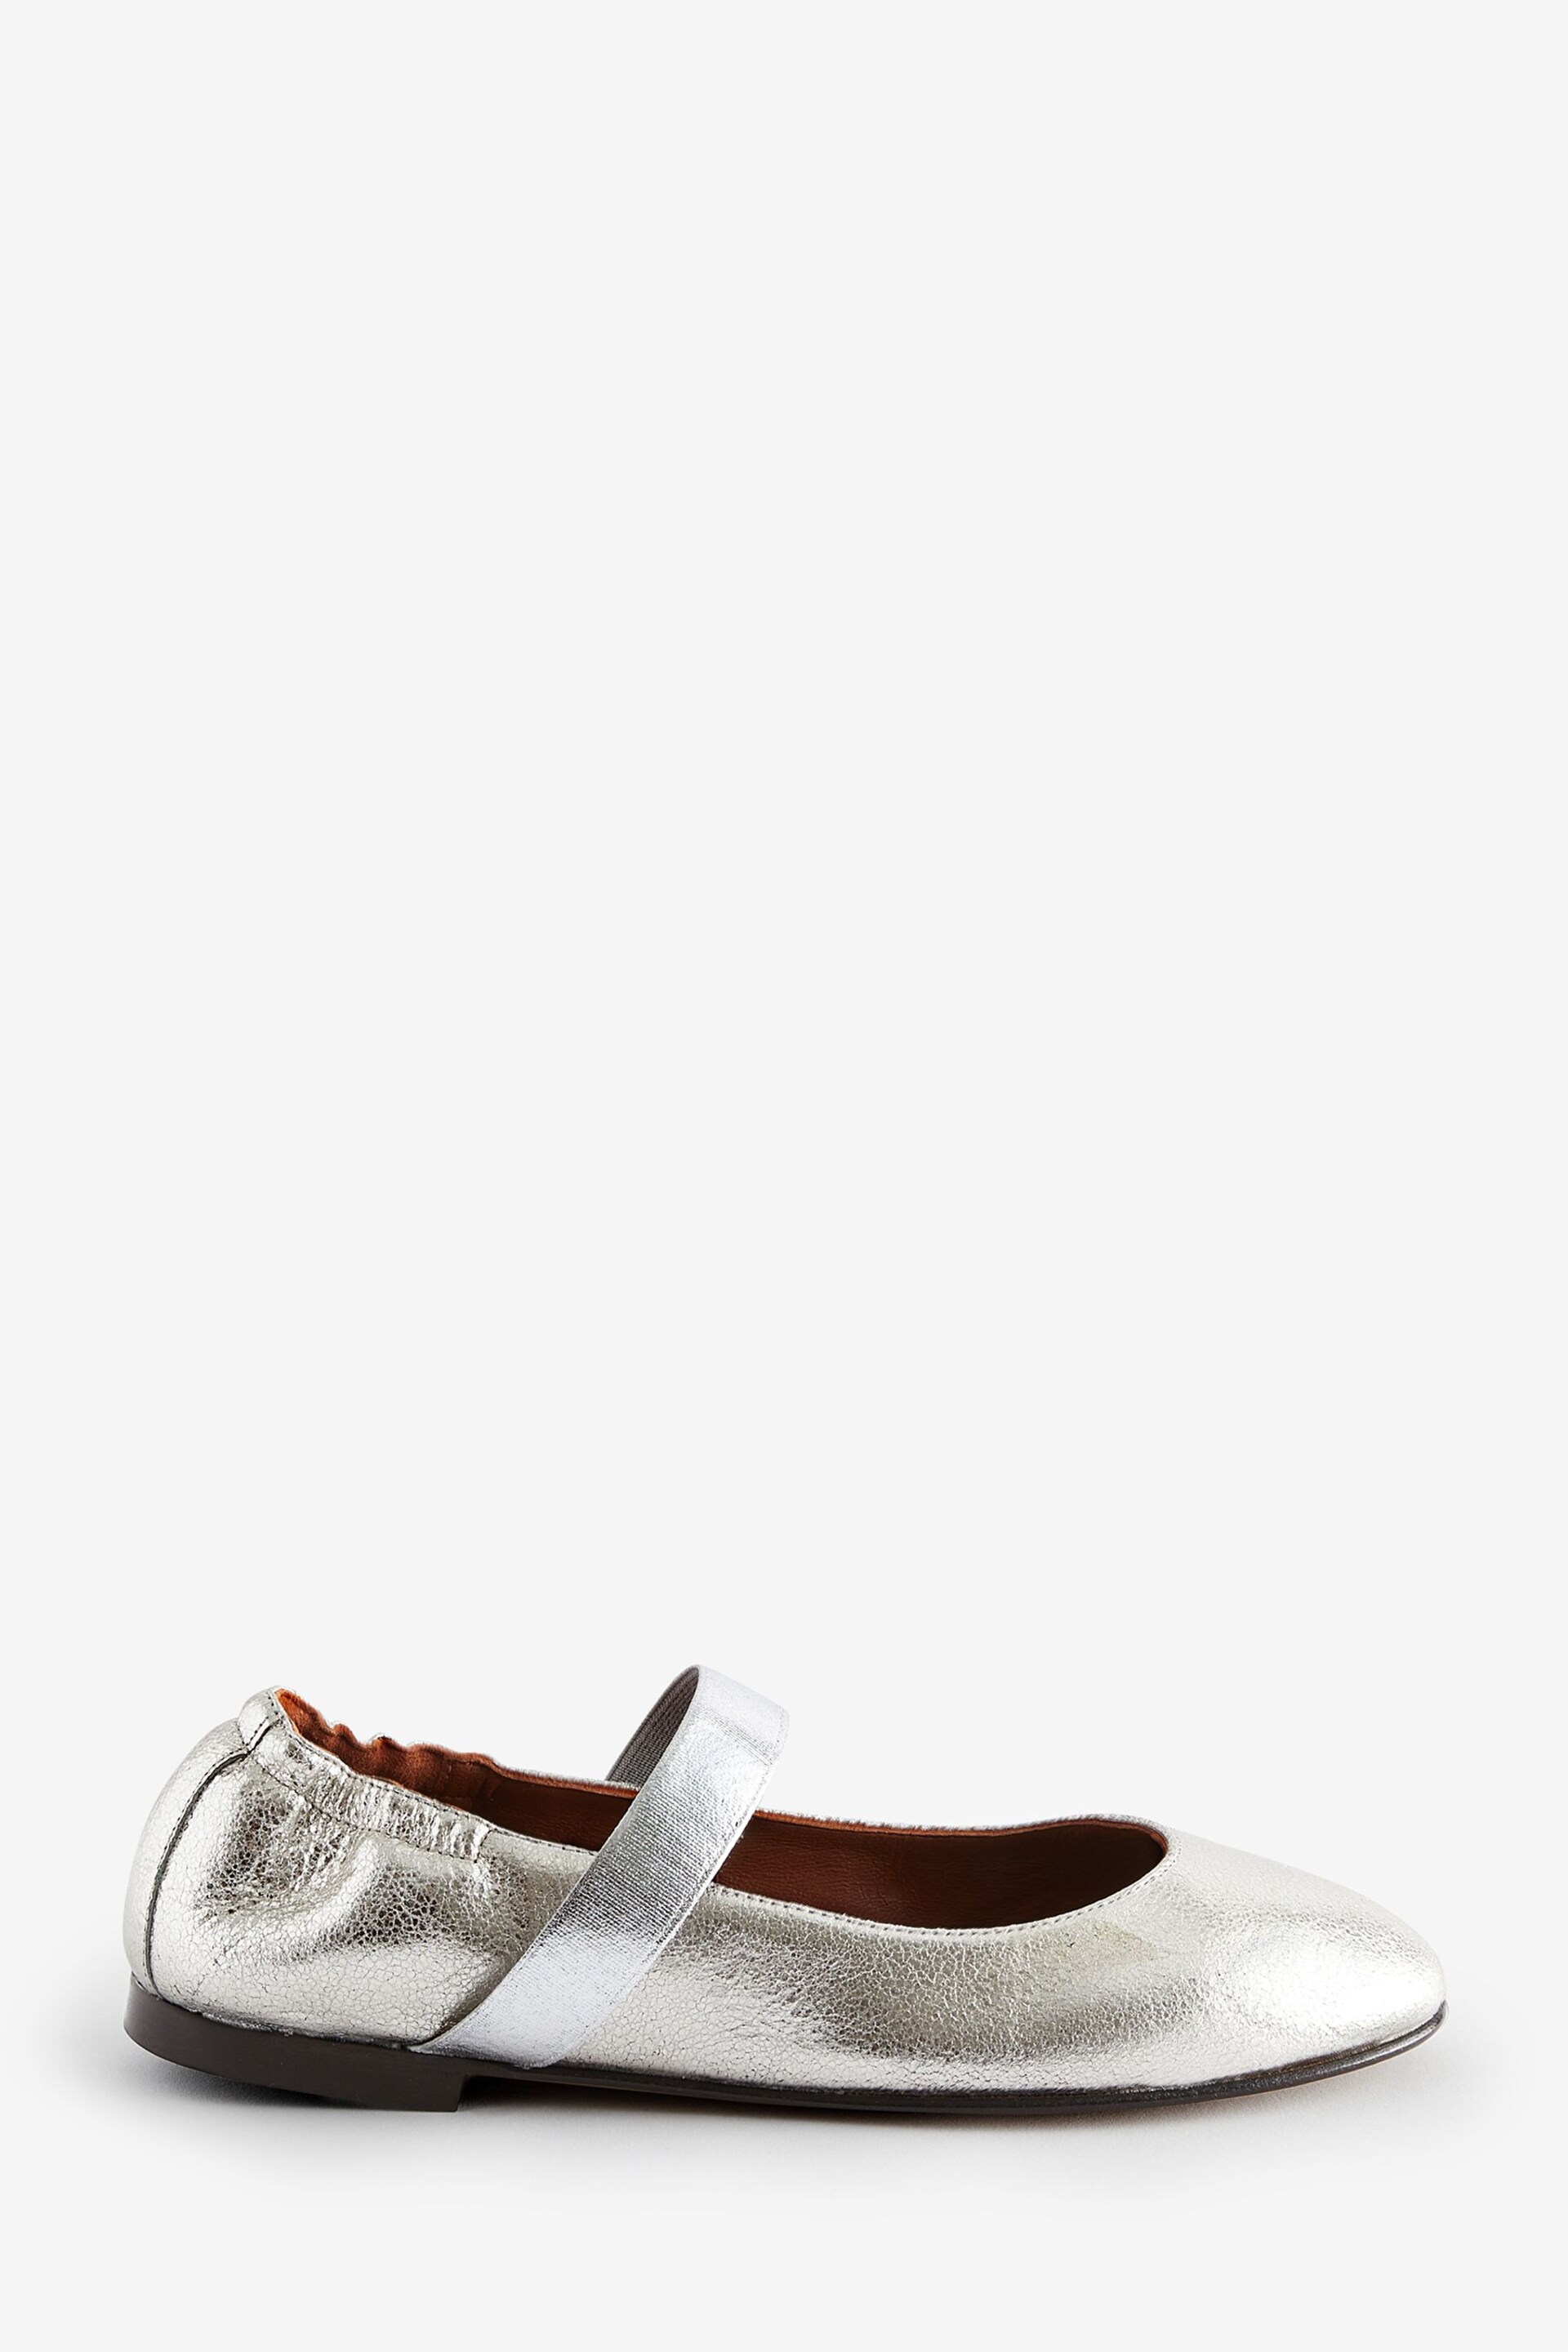 Penelope Chilvers Silver Rock And Roll Leather Shoes - Image 1 of 6